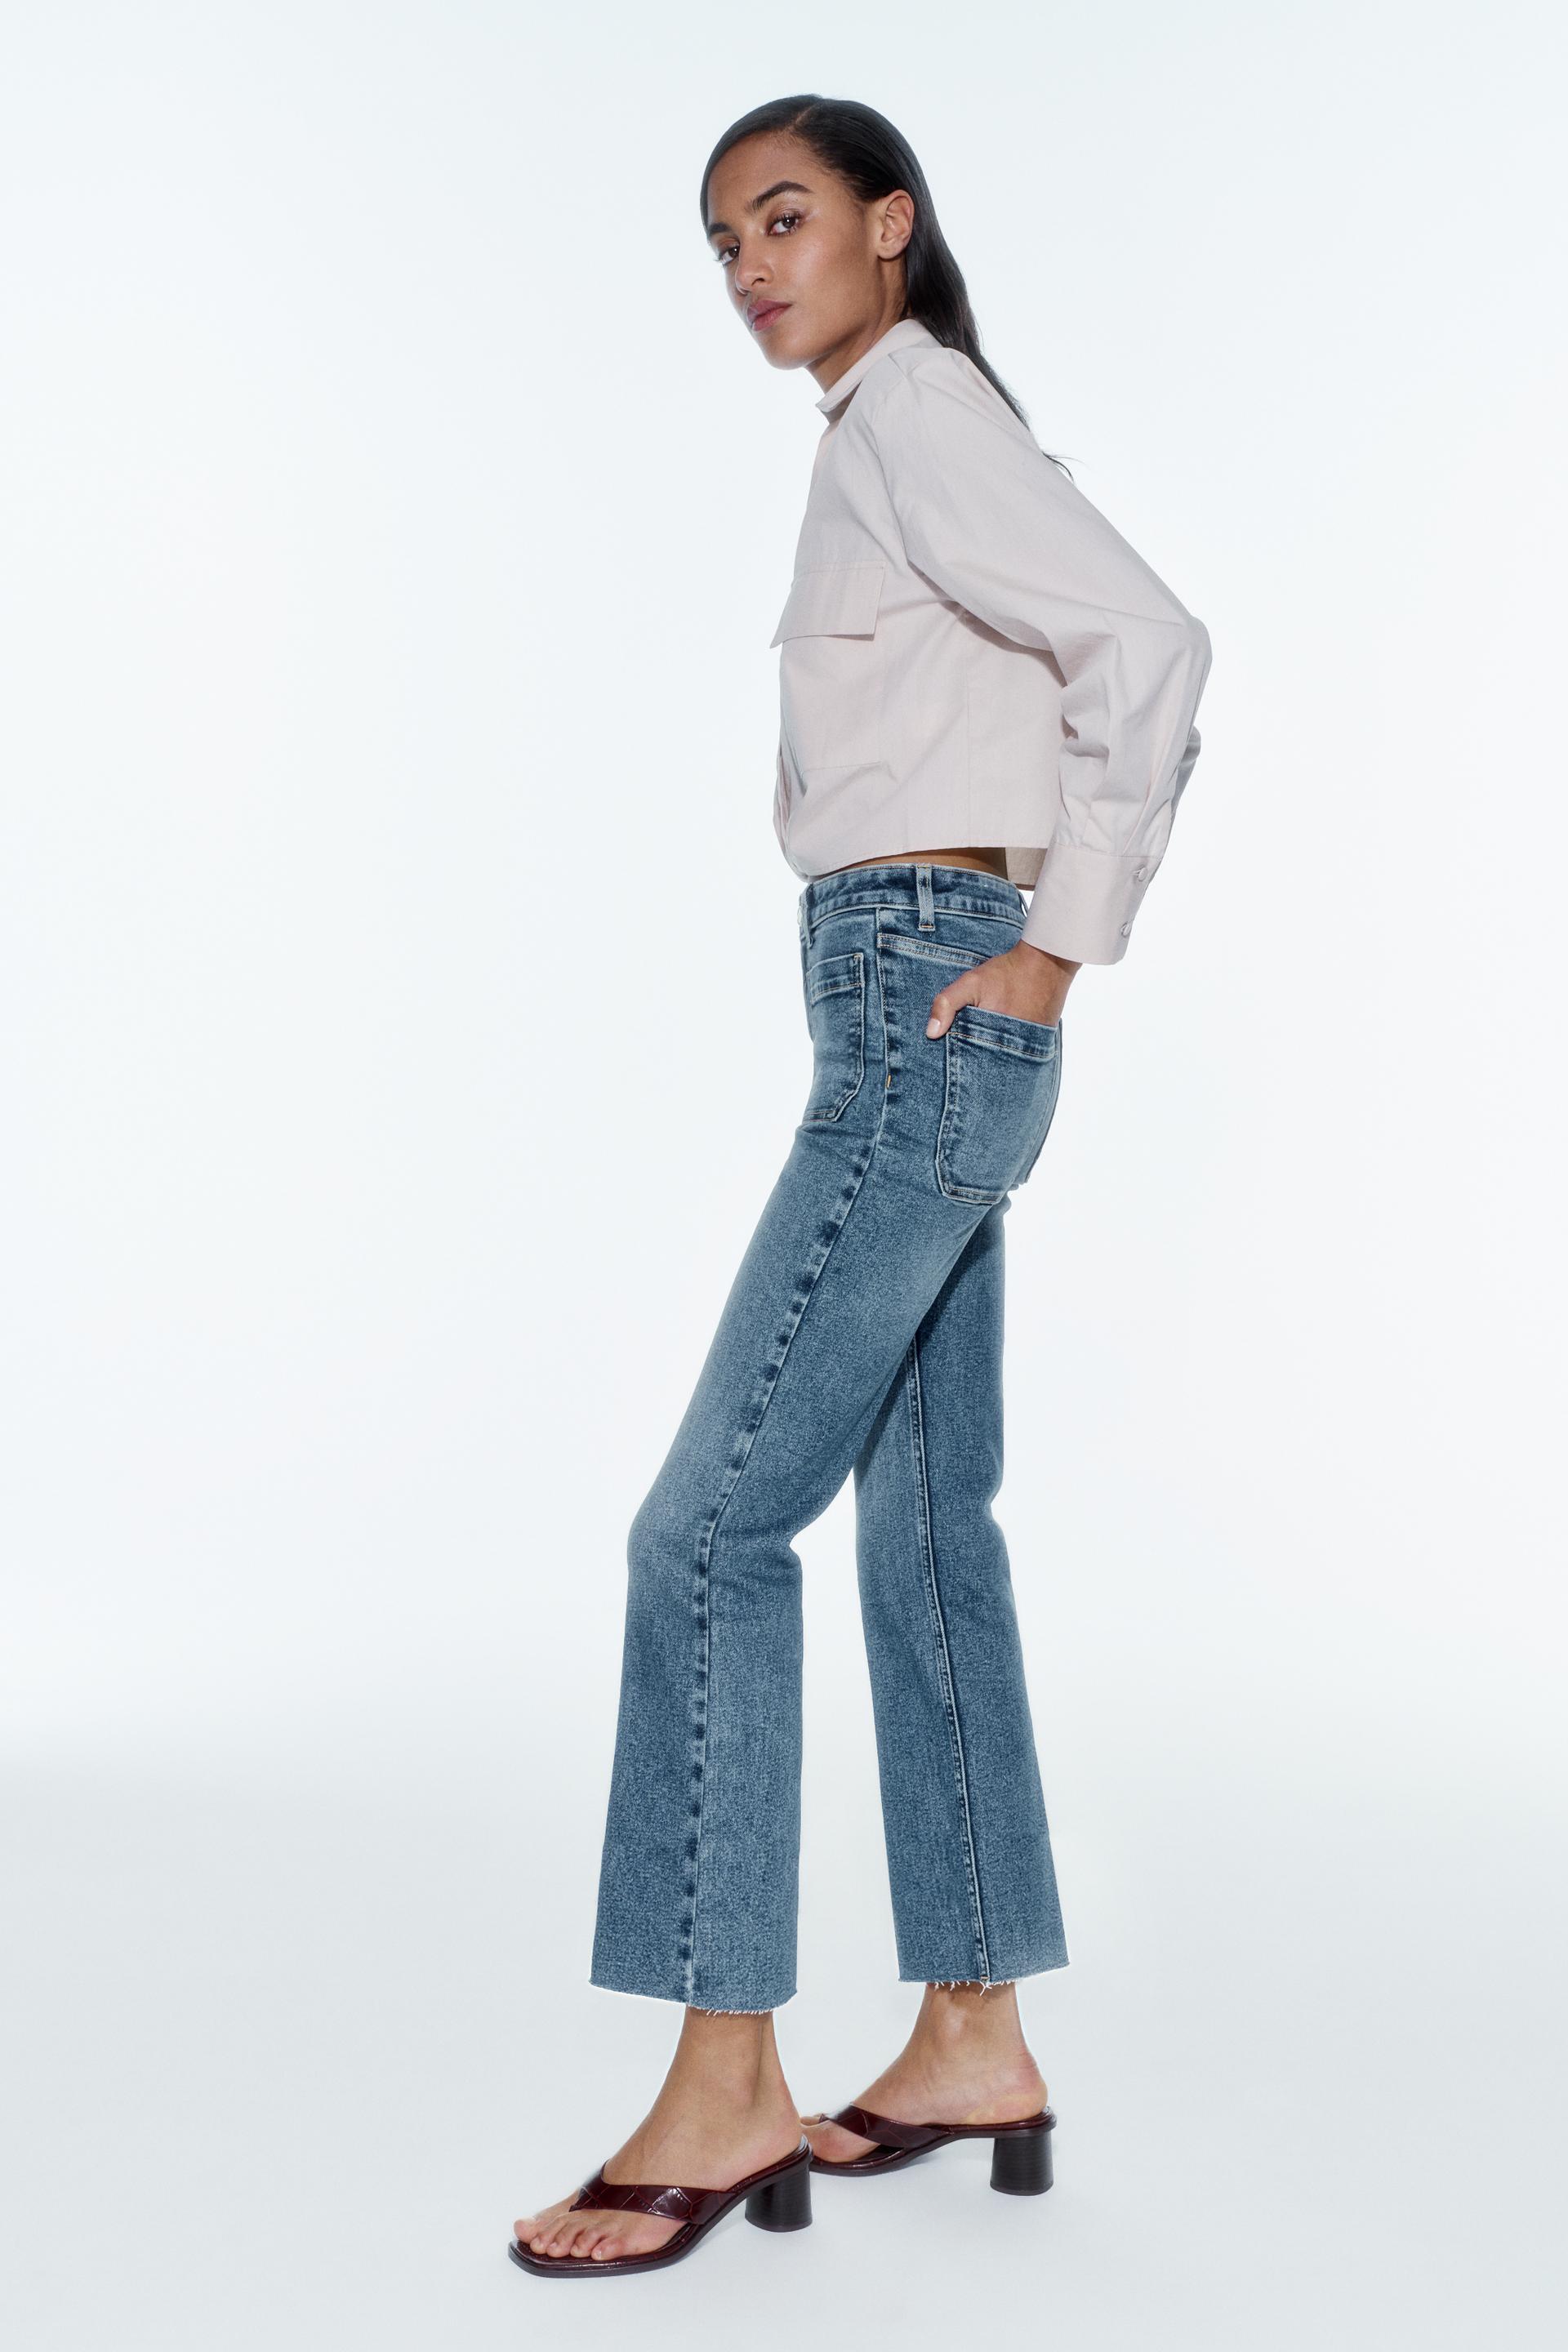 HIGH-WAISTED MINI FLARE JEANS Z1975 - Gray